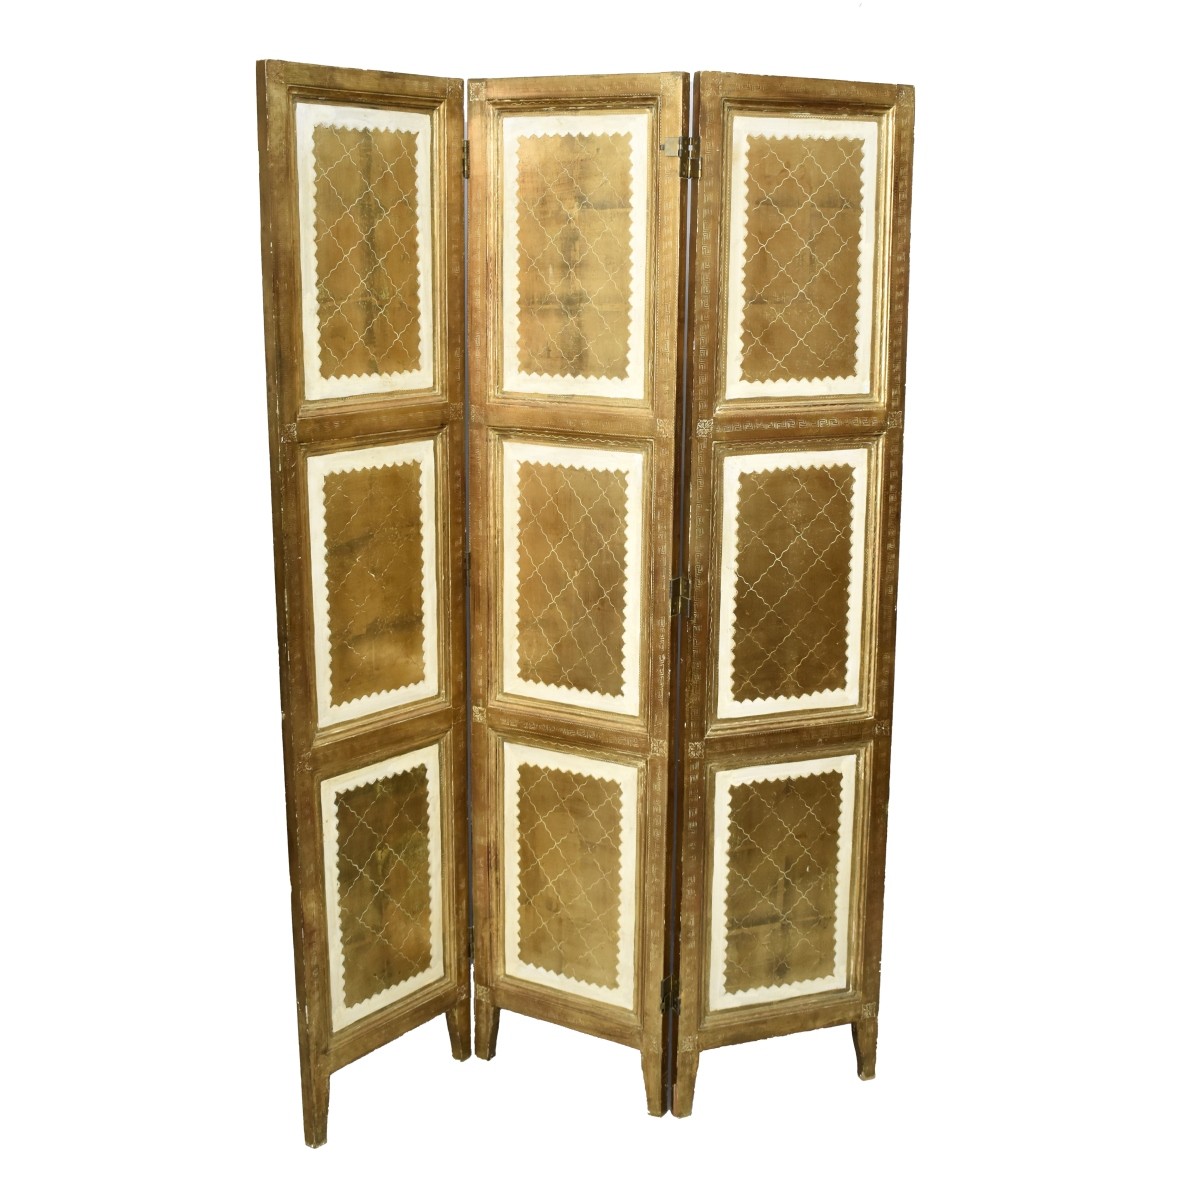 Mid 20th C. Neoclassical Style 3-Panel Screen